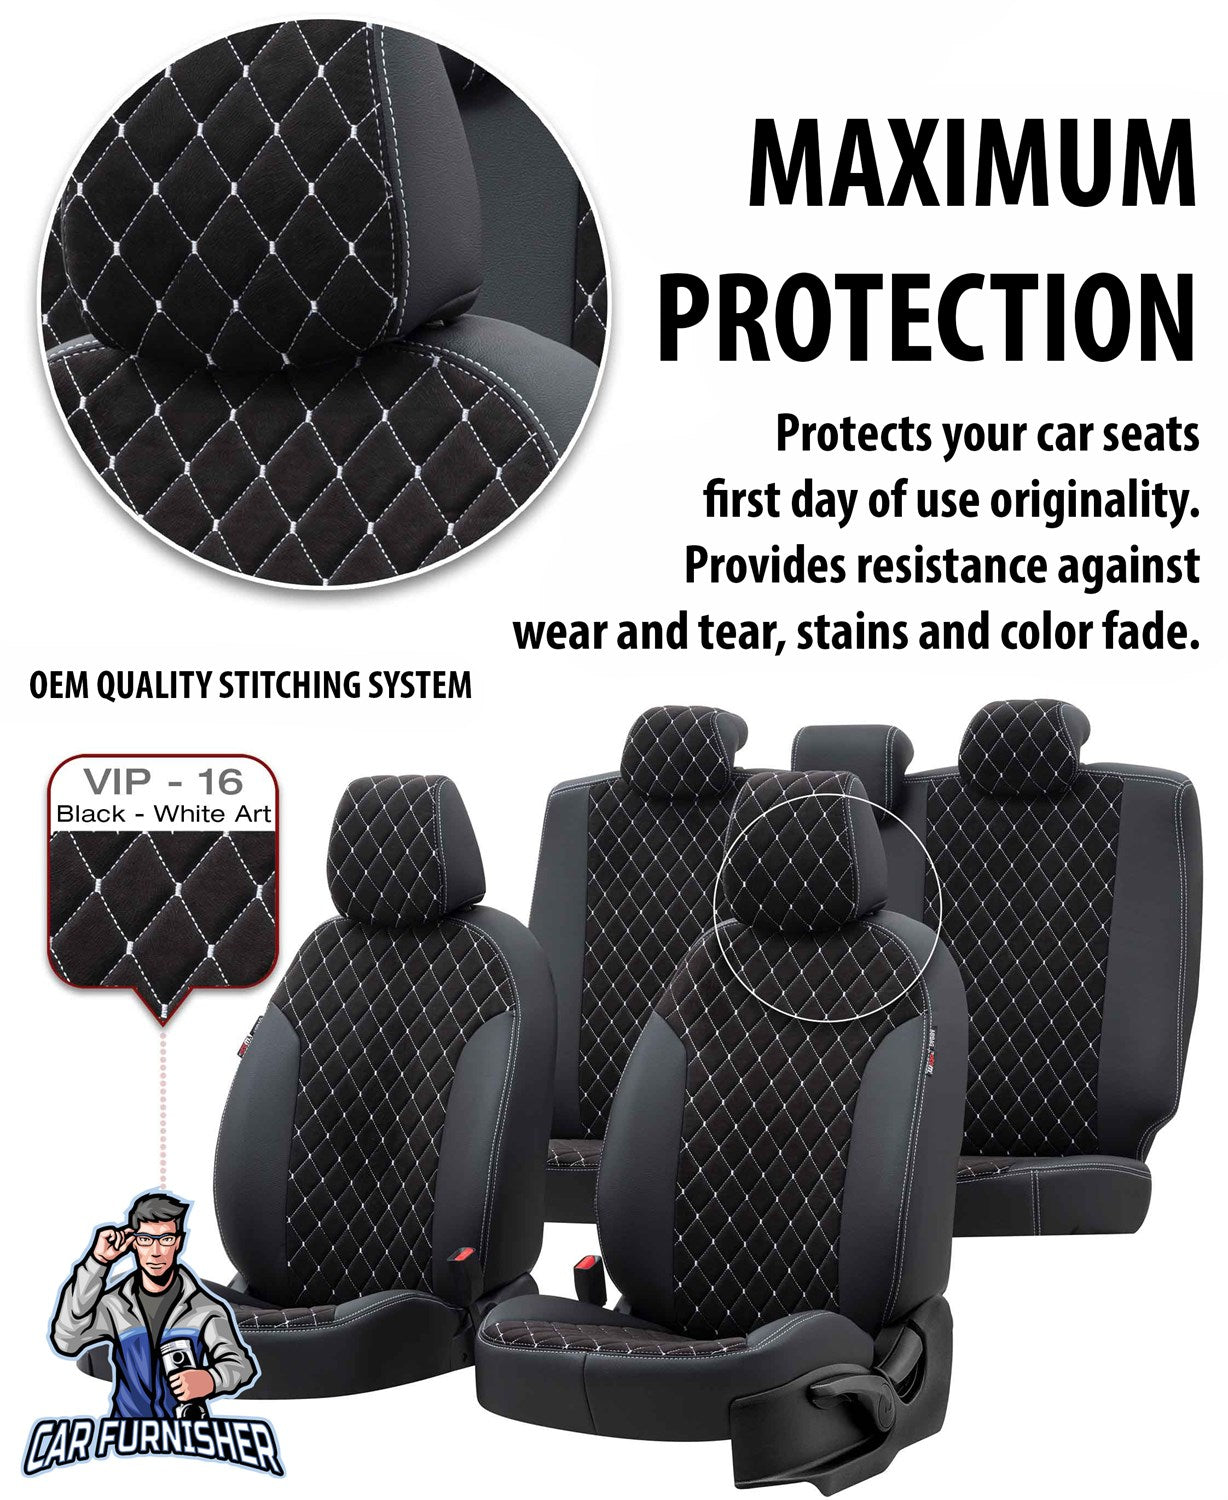 Kia Venga Seat Cover Camouflage Waterproof Design Smoked Leather & Foal Feather